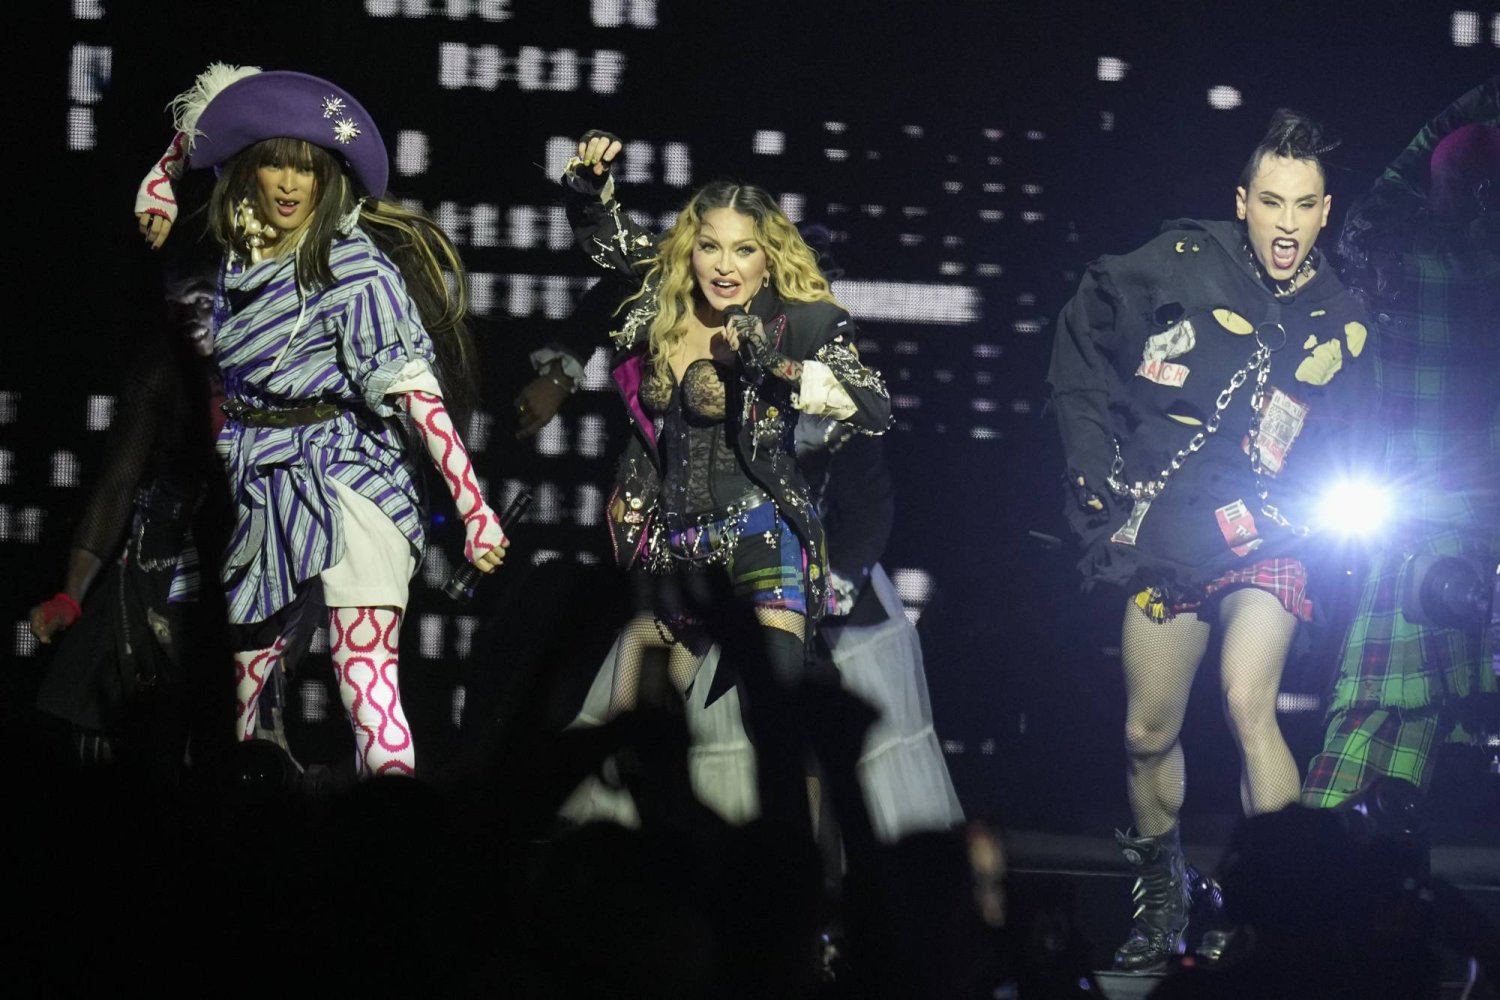 Madonna's Historic Concert in Rio: A Night to Remember